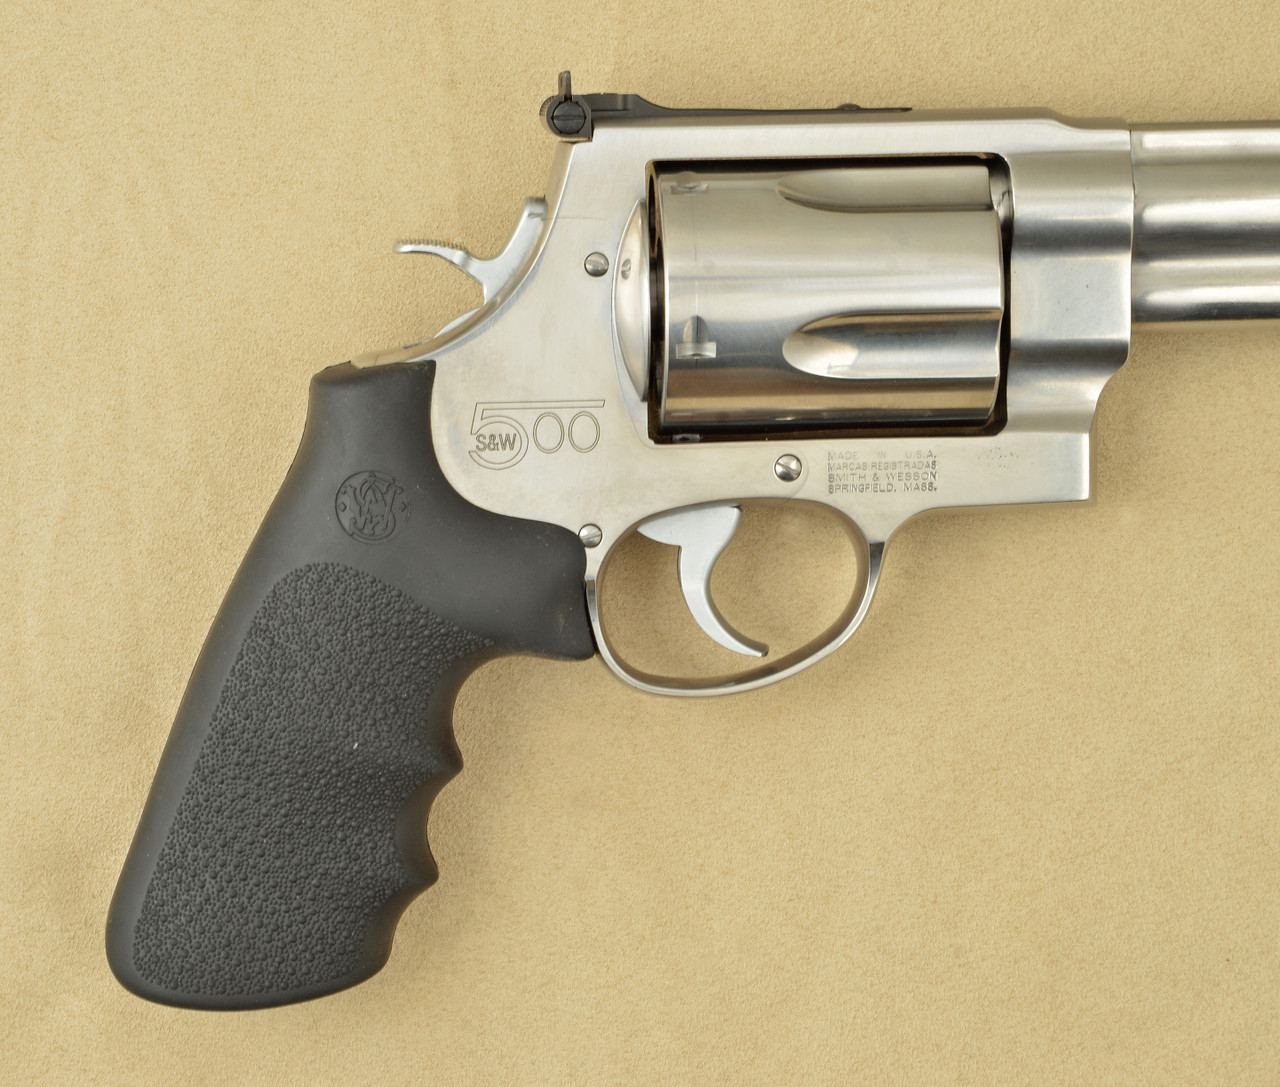 Smith & Wesson 500 - C61742